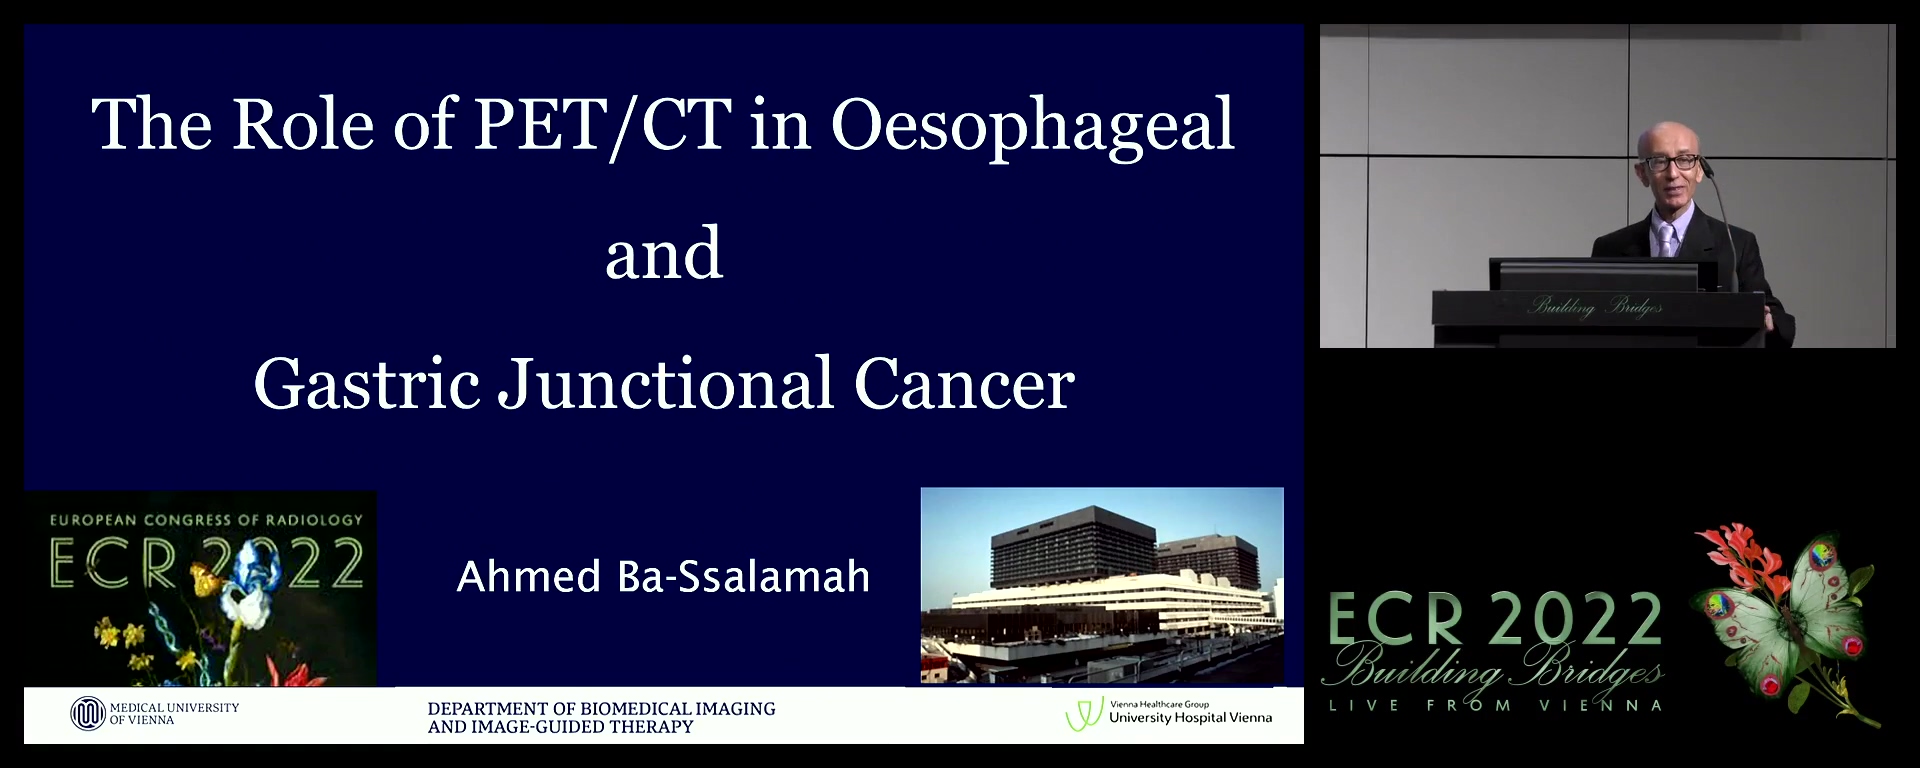 The role of PET/CT in oesophageal and gastric junctional cancer - Ahmed Ba-Ssalamah, Vienna / AT